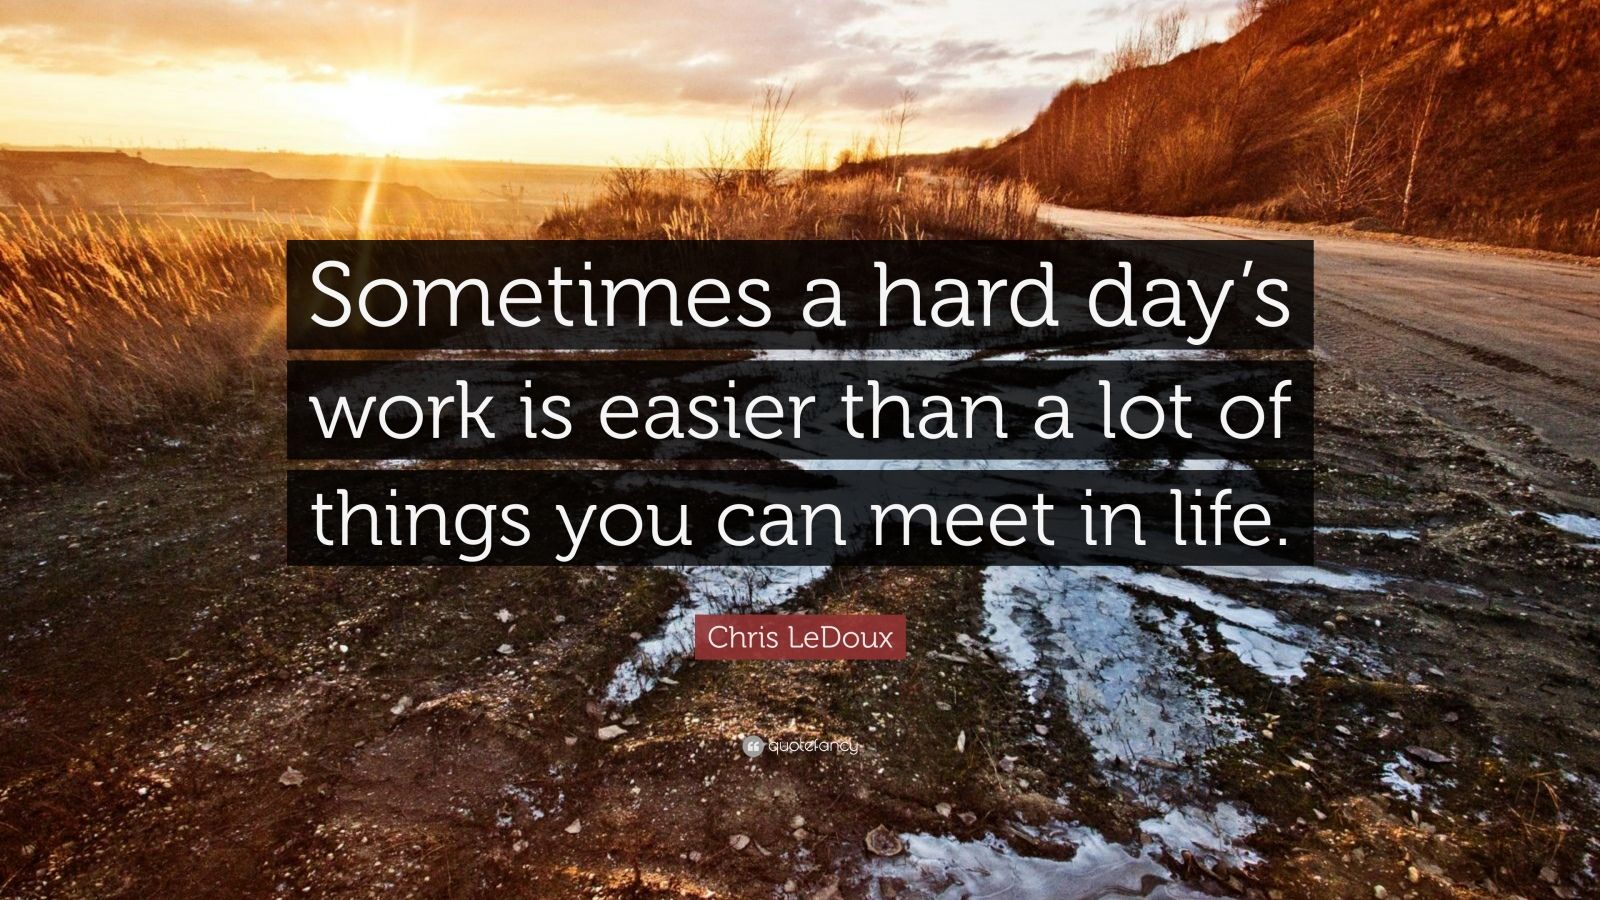 Chris LeDoux Quote “Sometimes a hard day’s work is easier